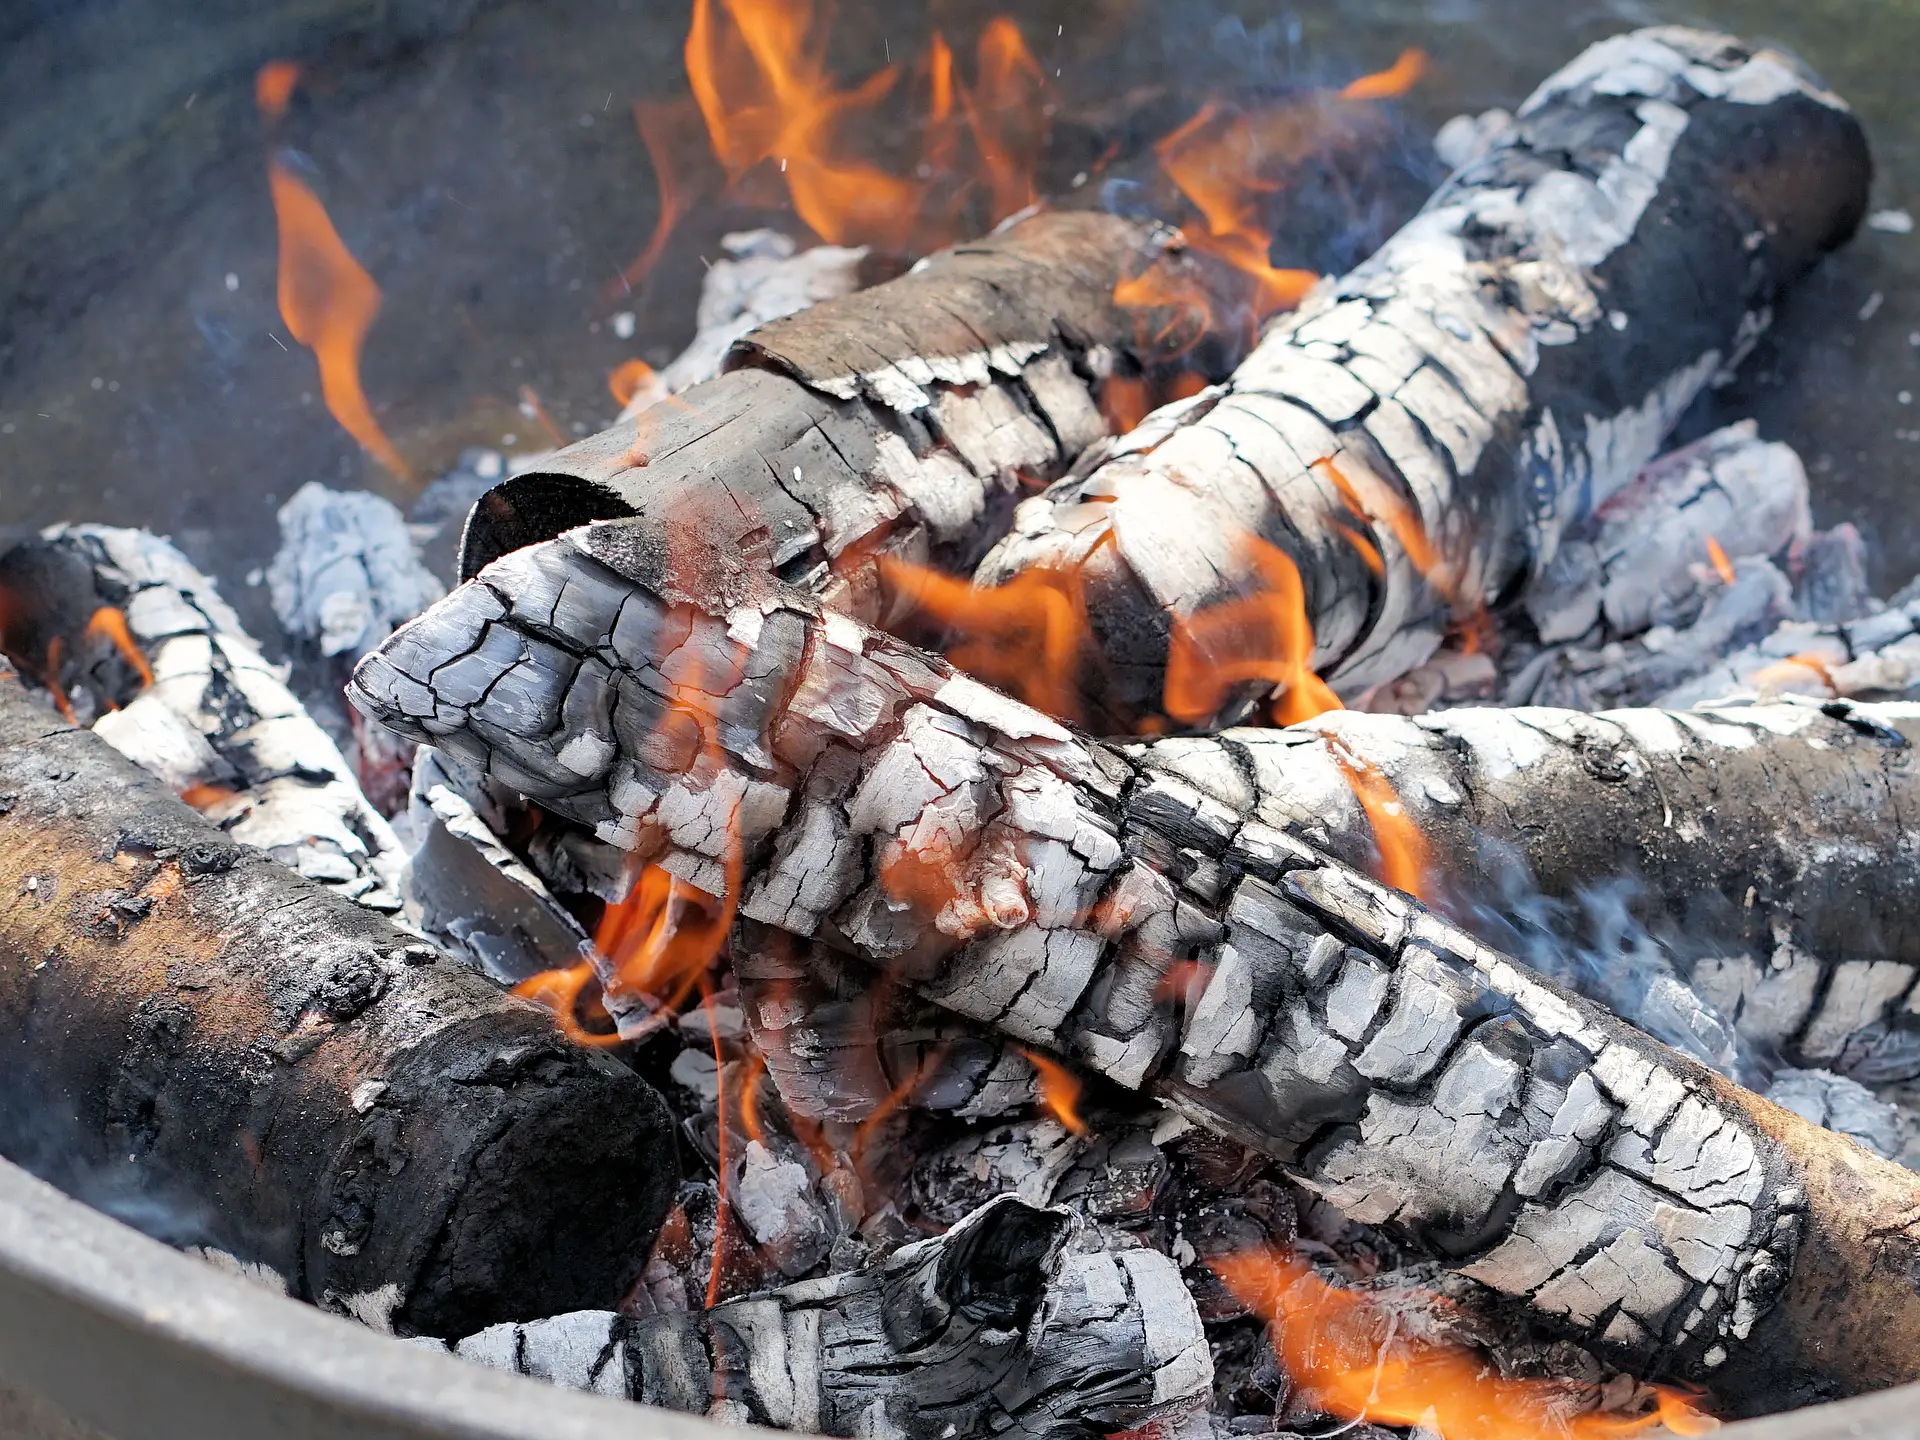 How To Start A Wood Burning Fire Pit, Starting A Fire In A Fire Pit